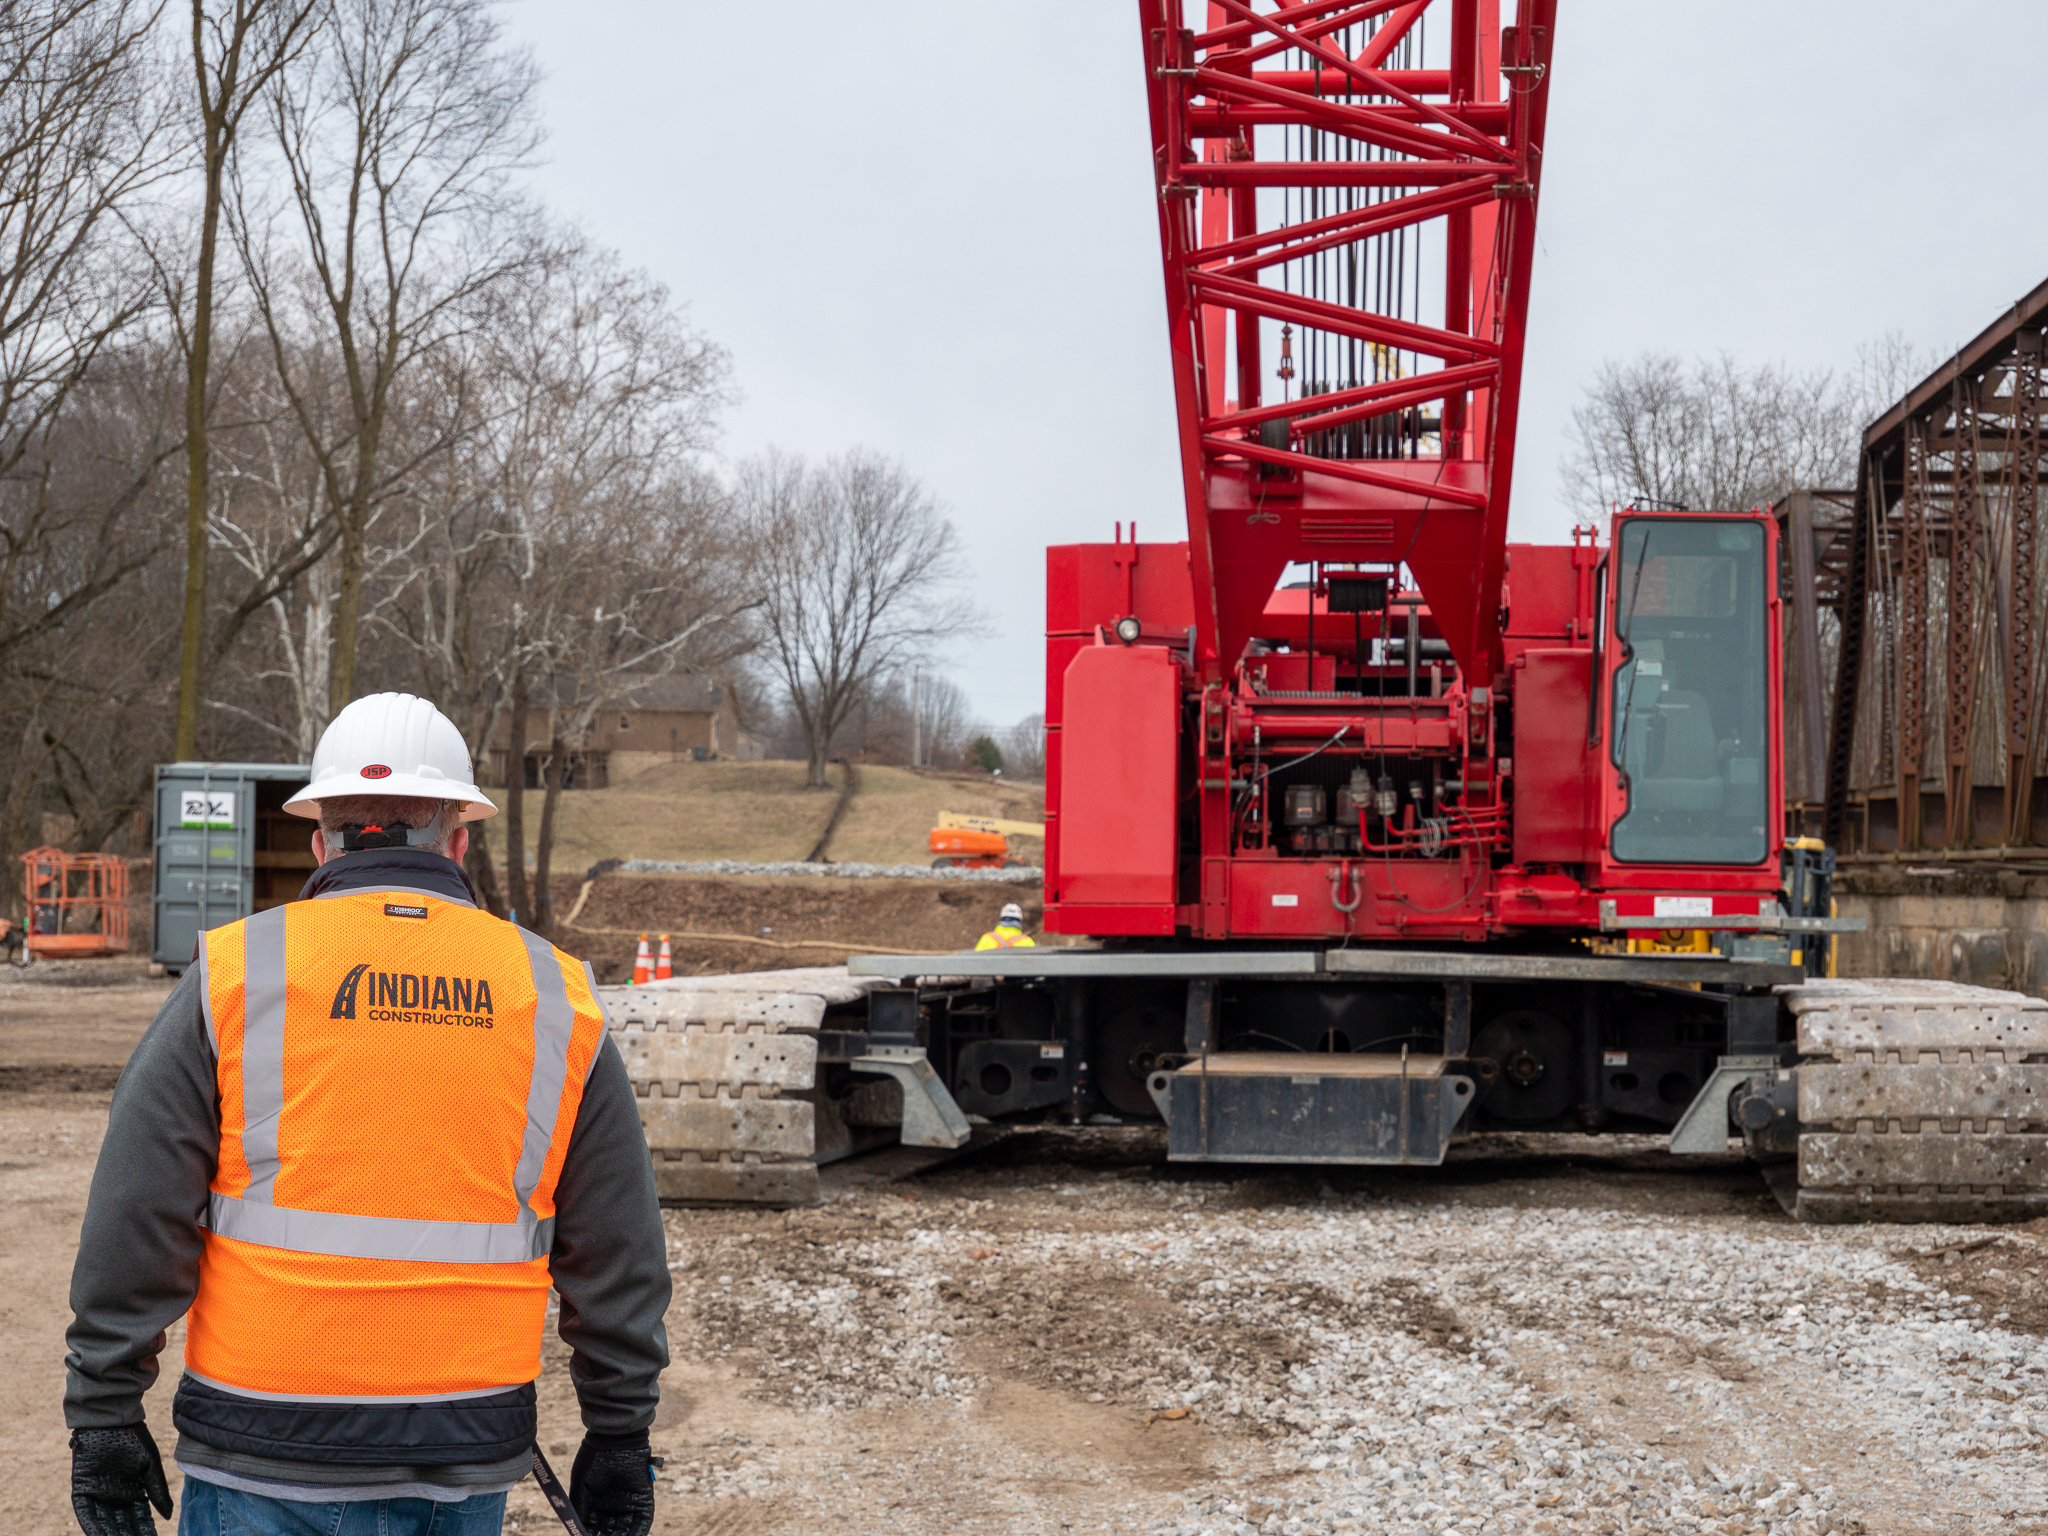 Work IN Roads team member Eric Fisher stands next to large red crane at jobsite